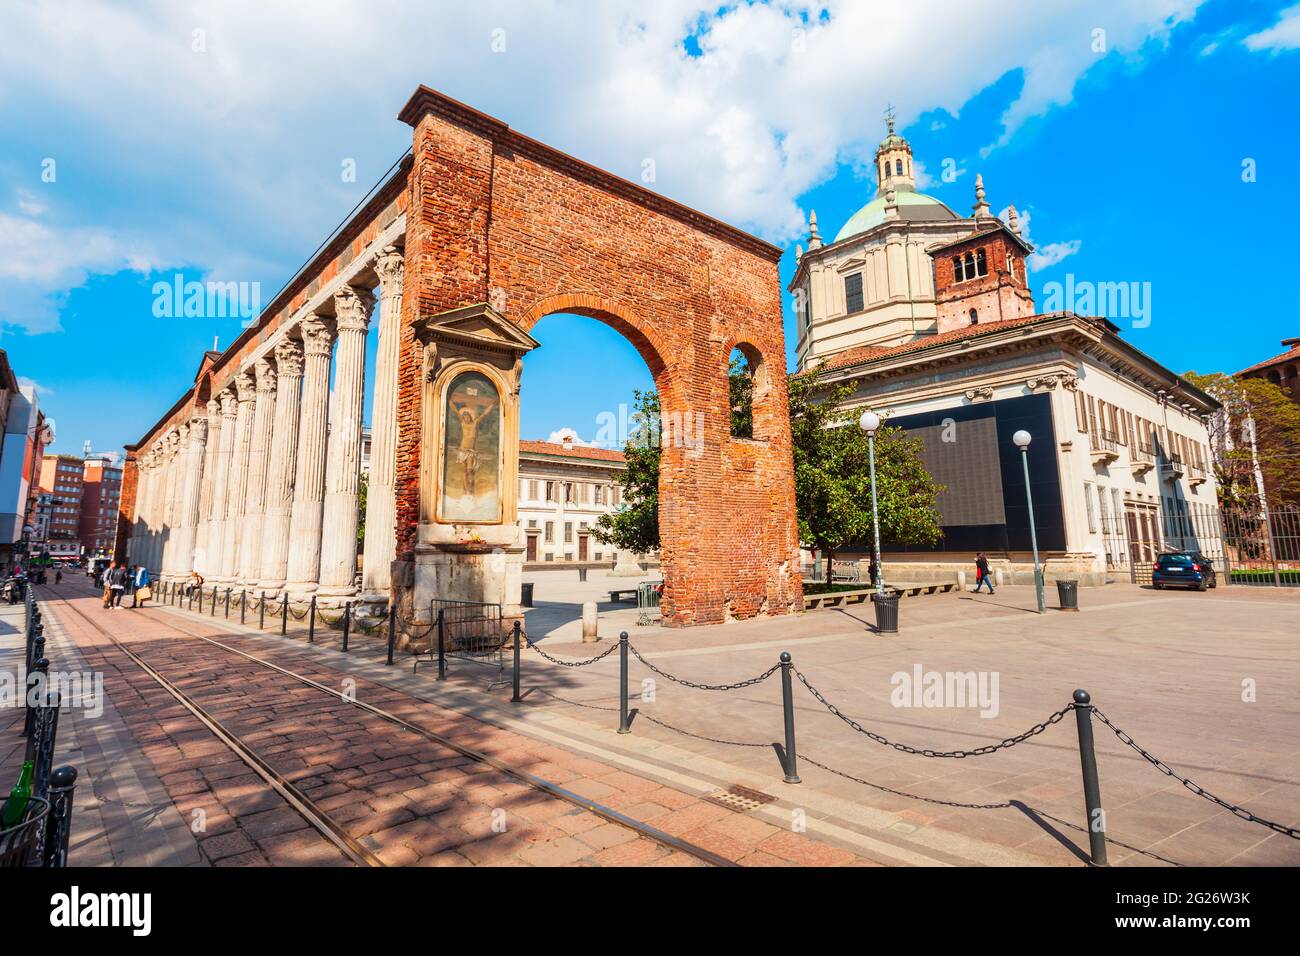 The Colonne or Columns di San Lorenzo is an ancient Roman ruins located in front of the San  Lorenzo Basilica in Milan, Italy Stock Photo